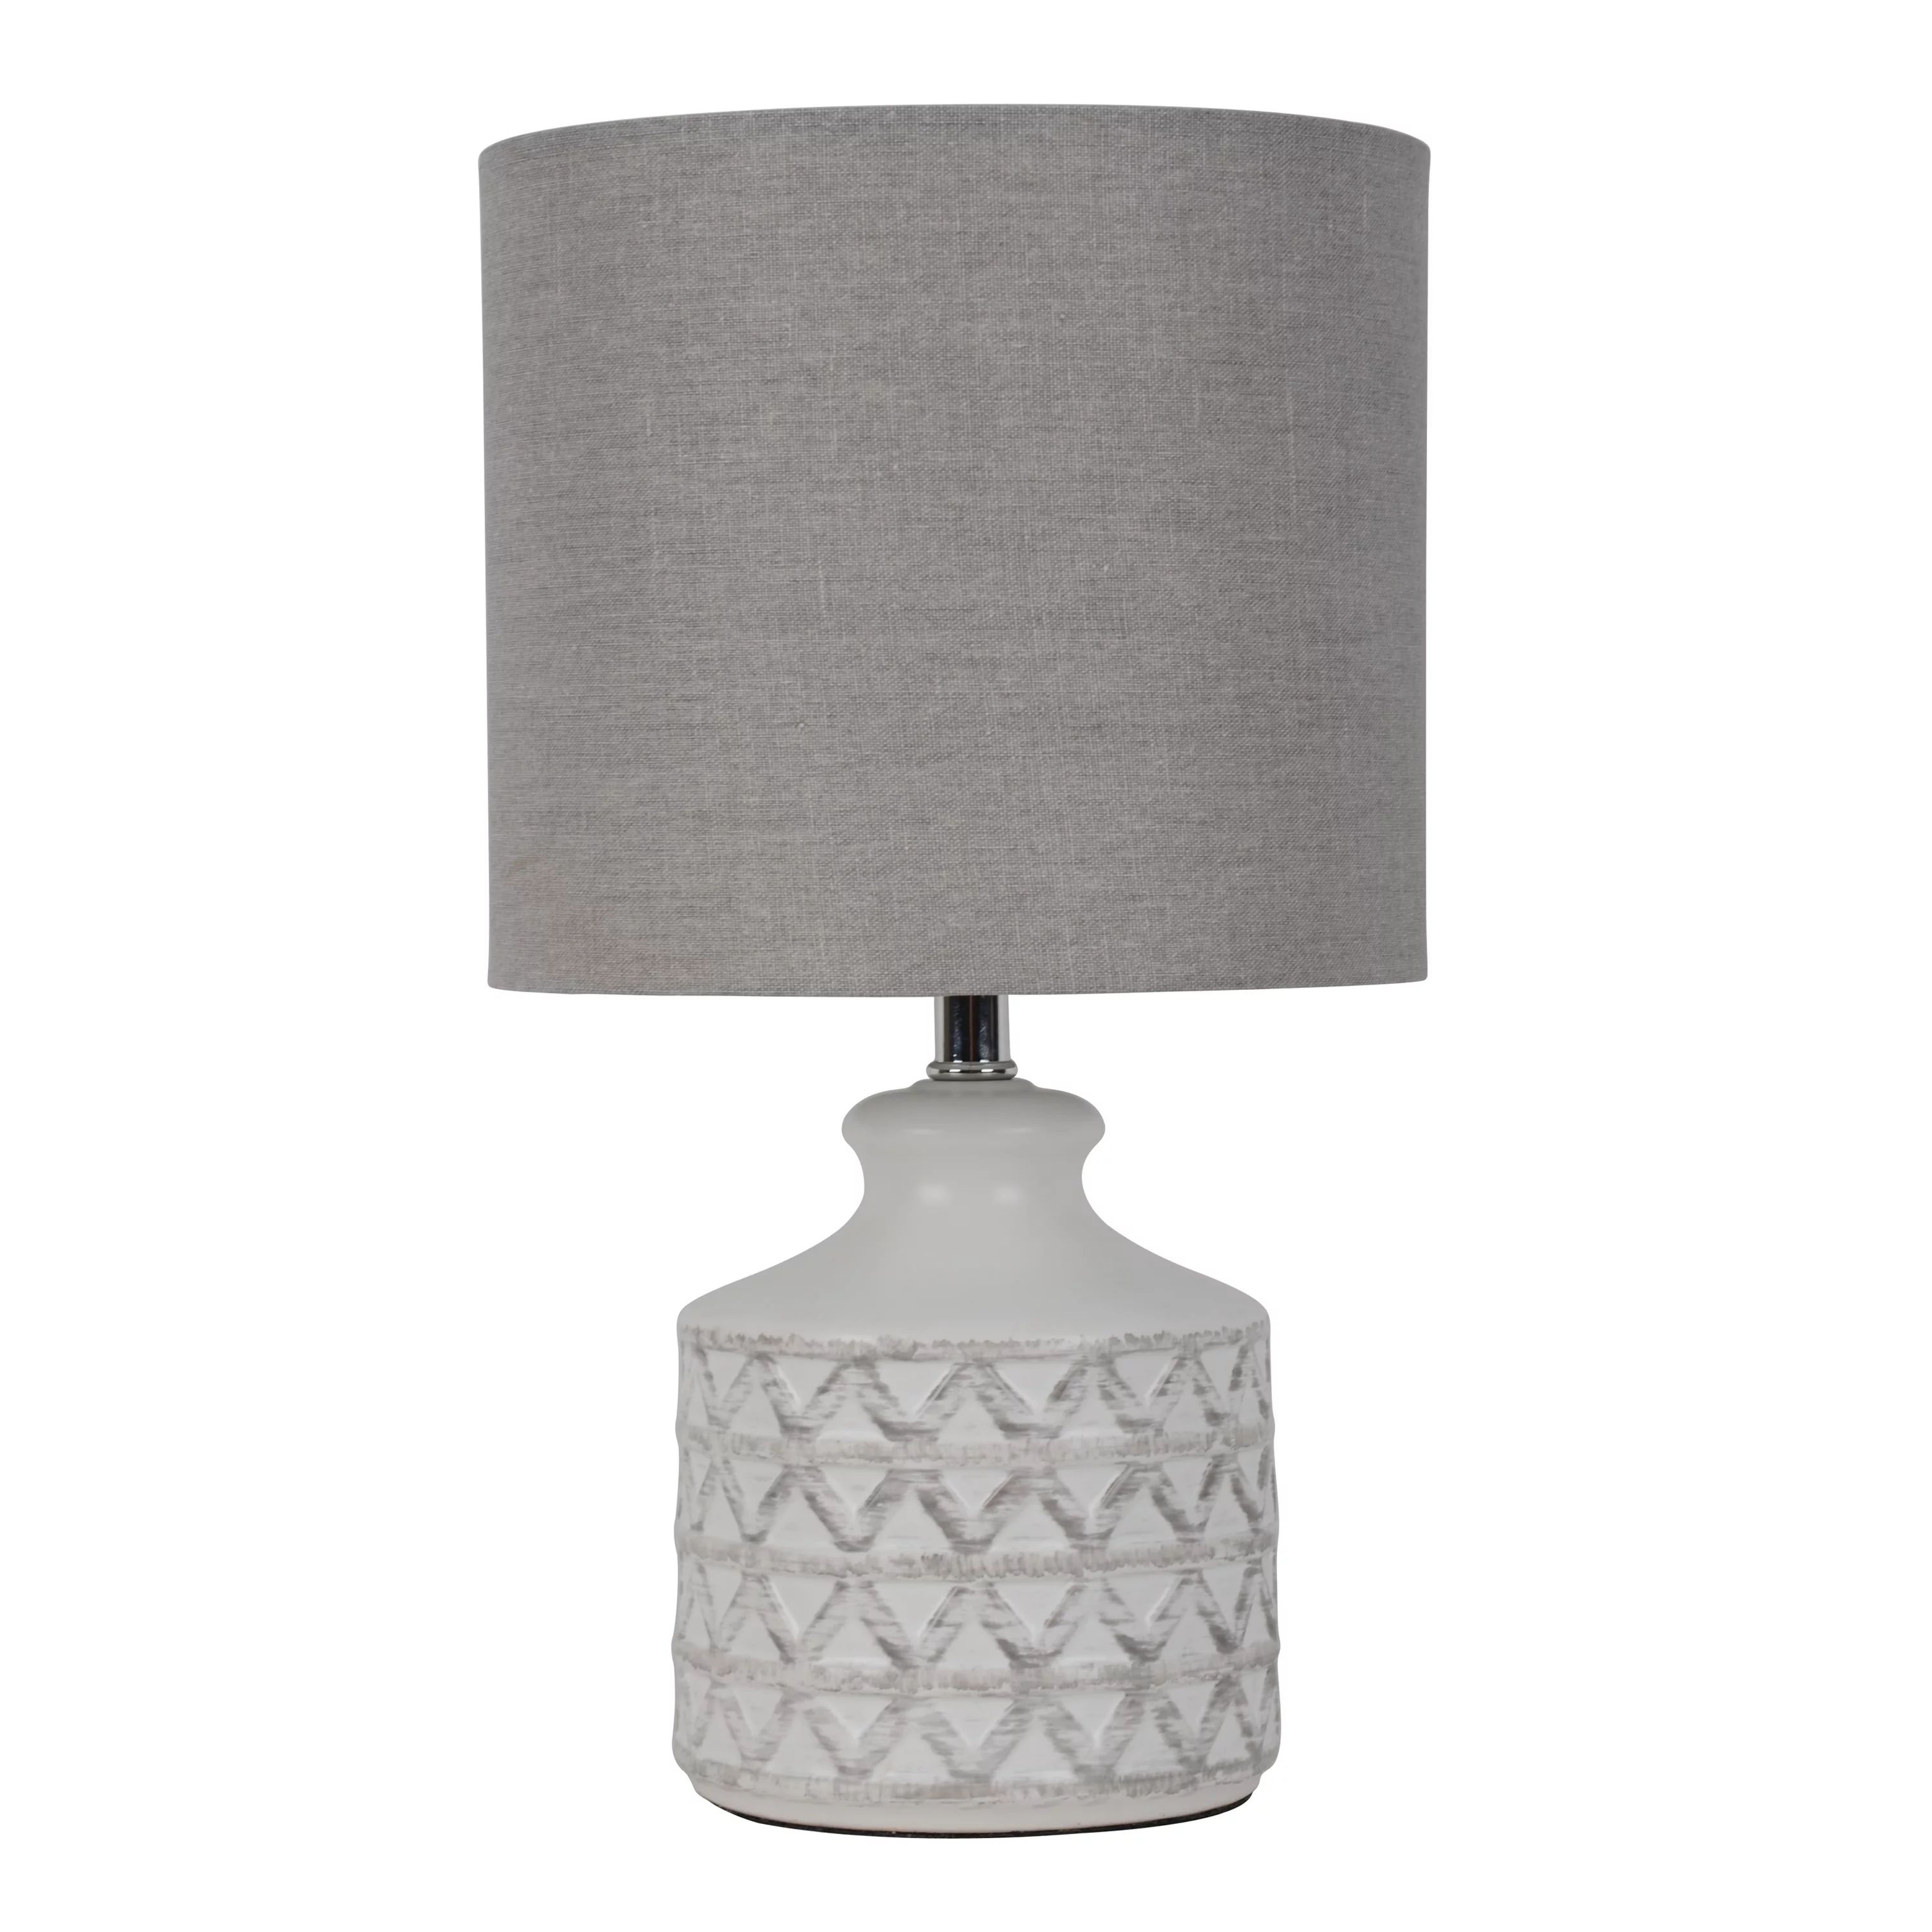 Better Homes & Gardens Diamond Weave Table Lamp, Distressed White with LED Bulb | Walmart (US)